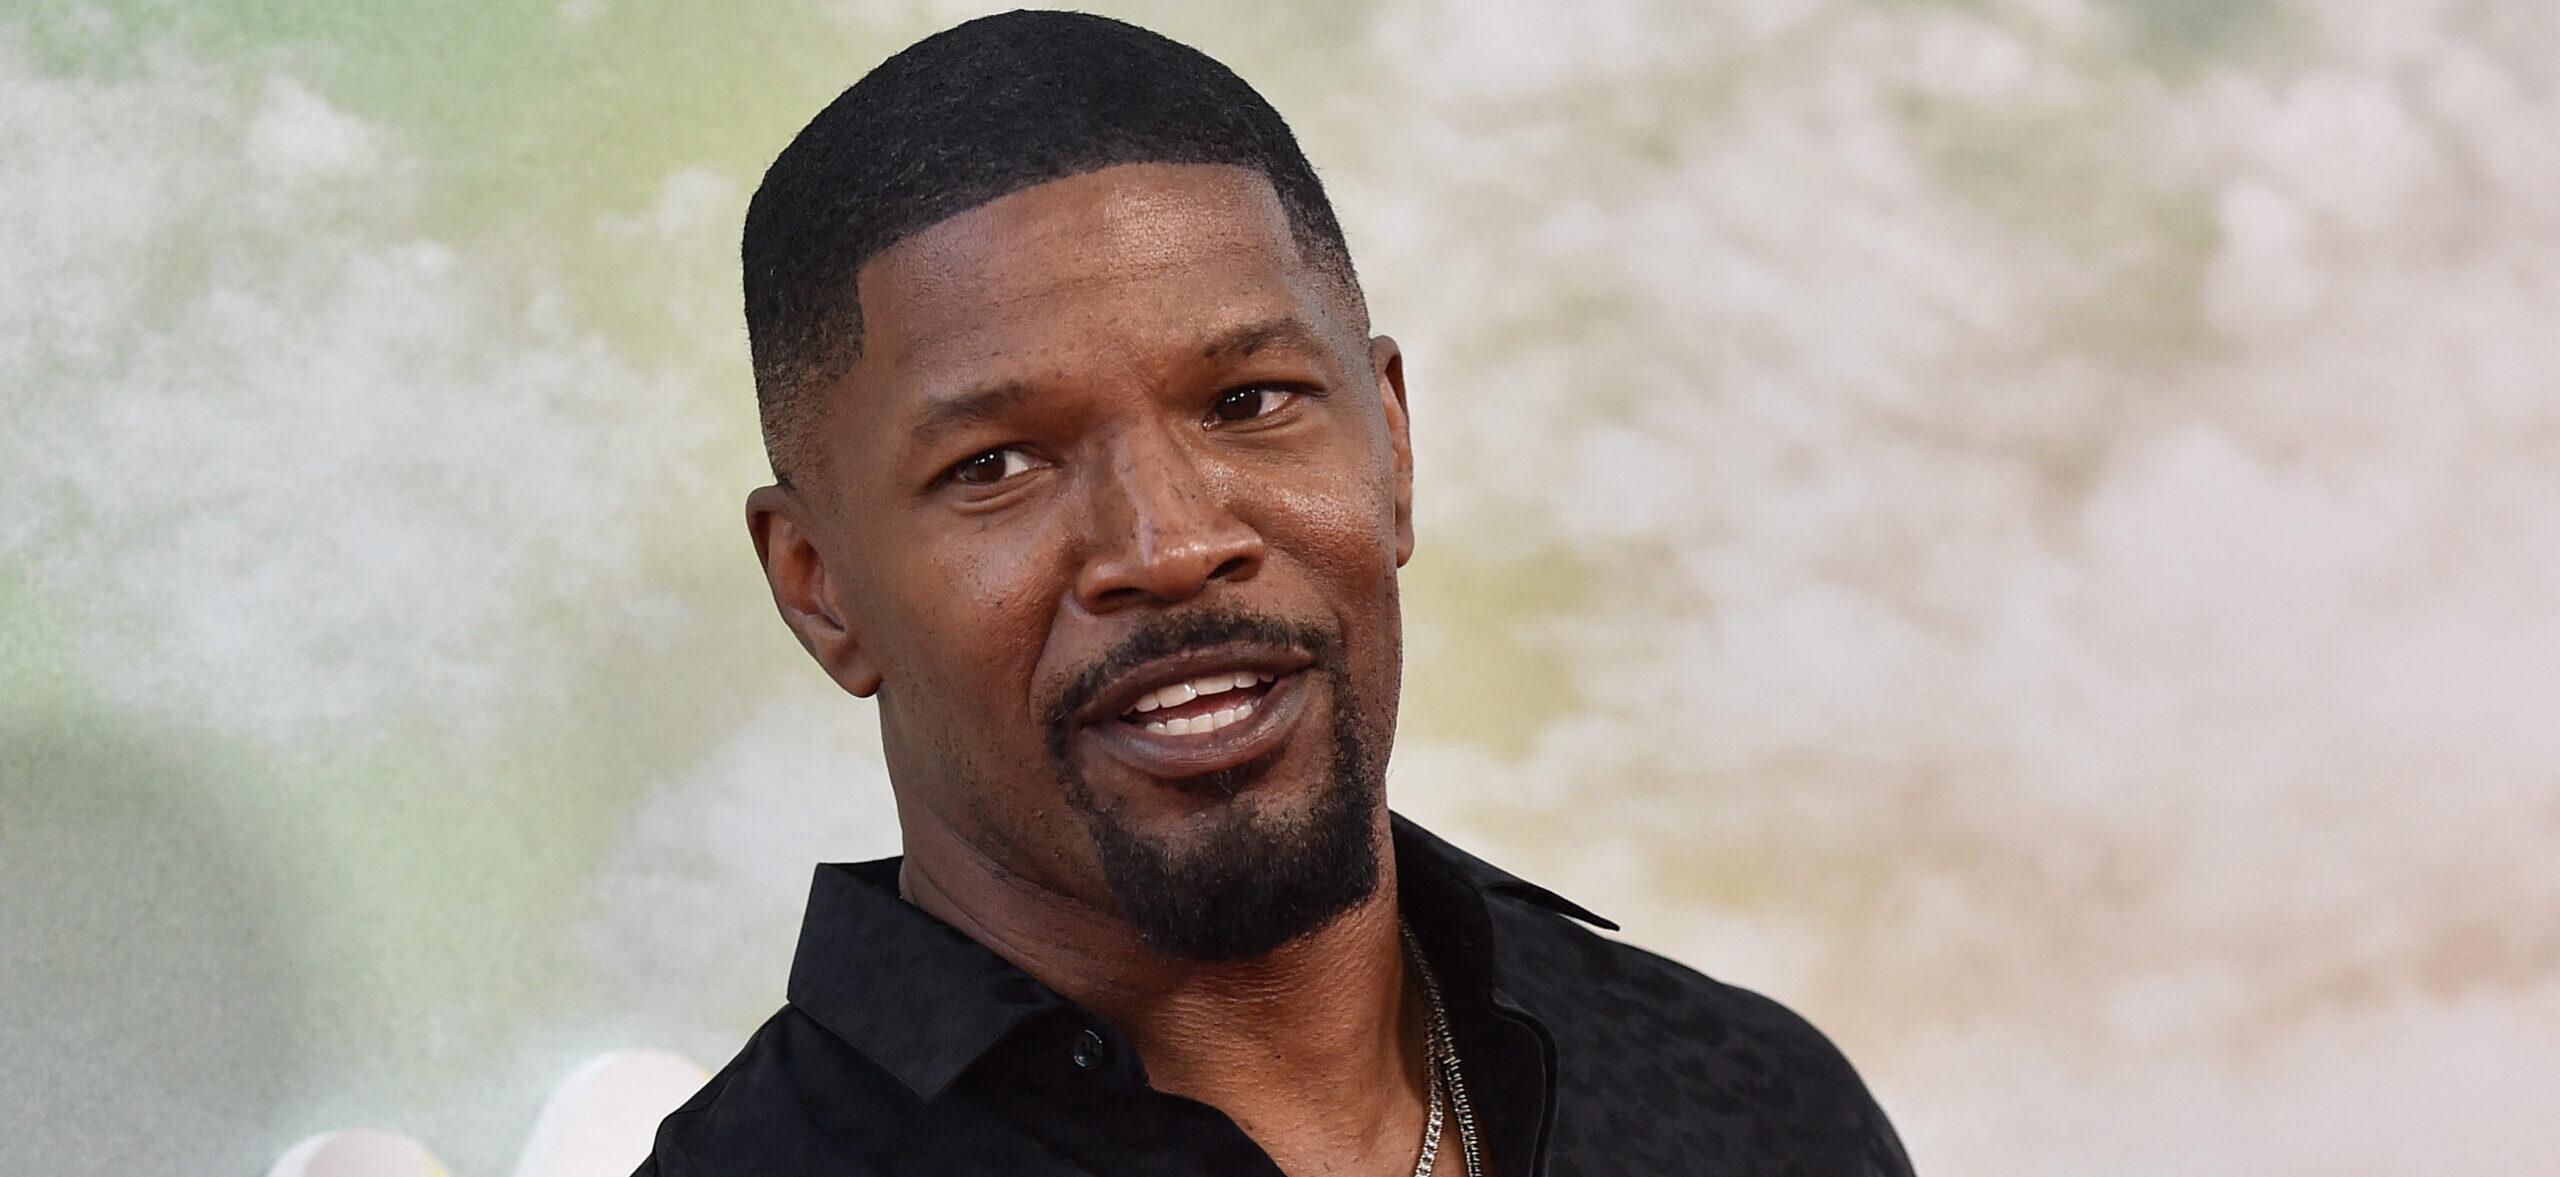 Jamie Foxx Is Reportedly ‘Not 100 Percent’ Well Yet Amid Recent Public Appearances After His Health Scare